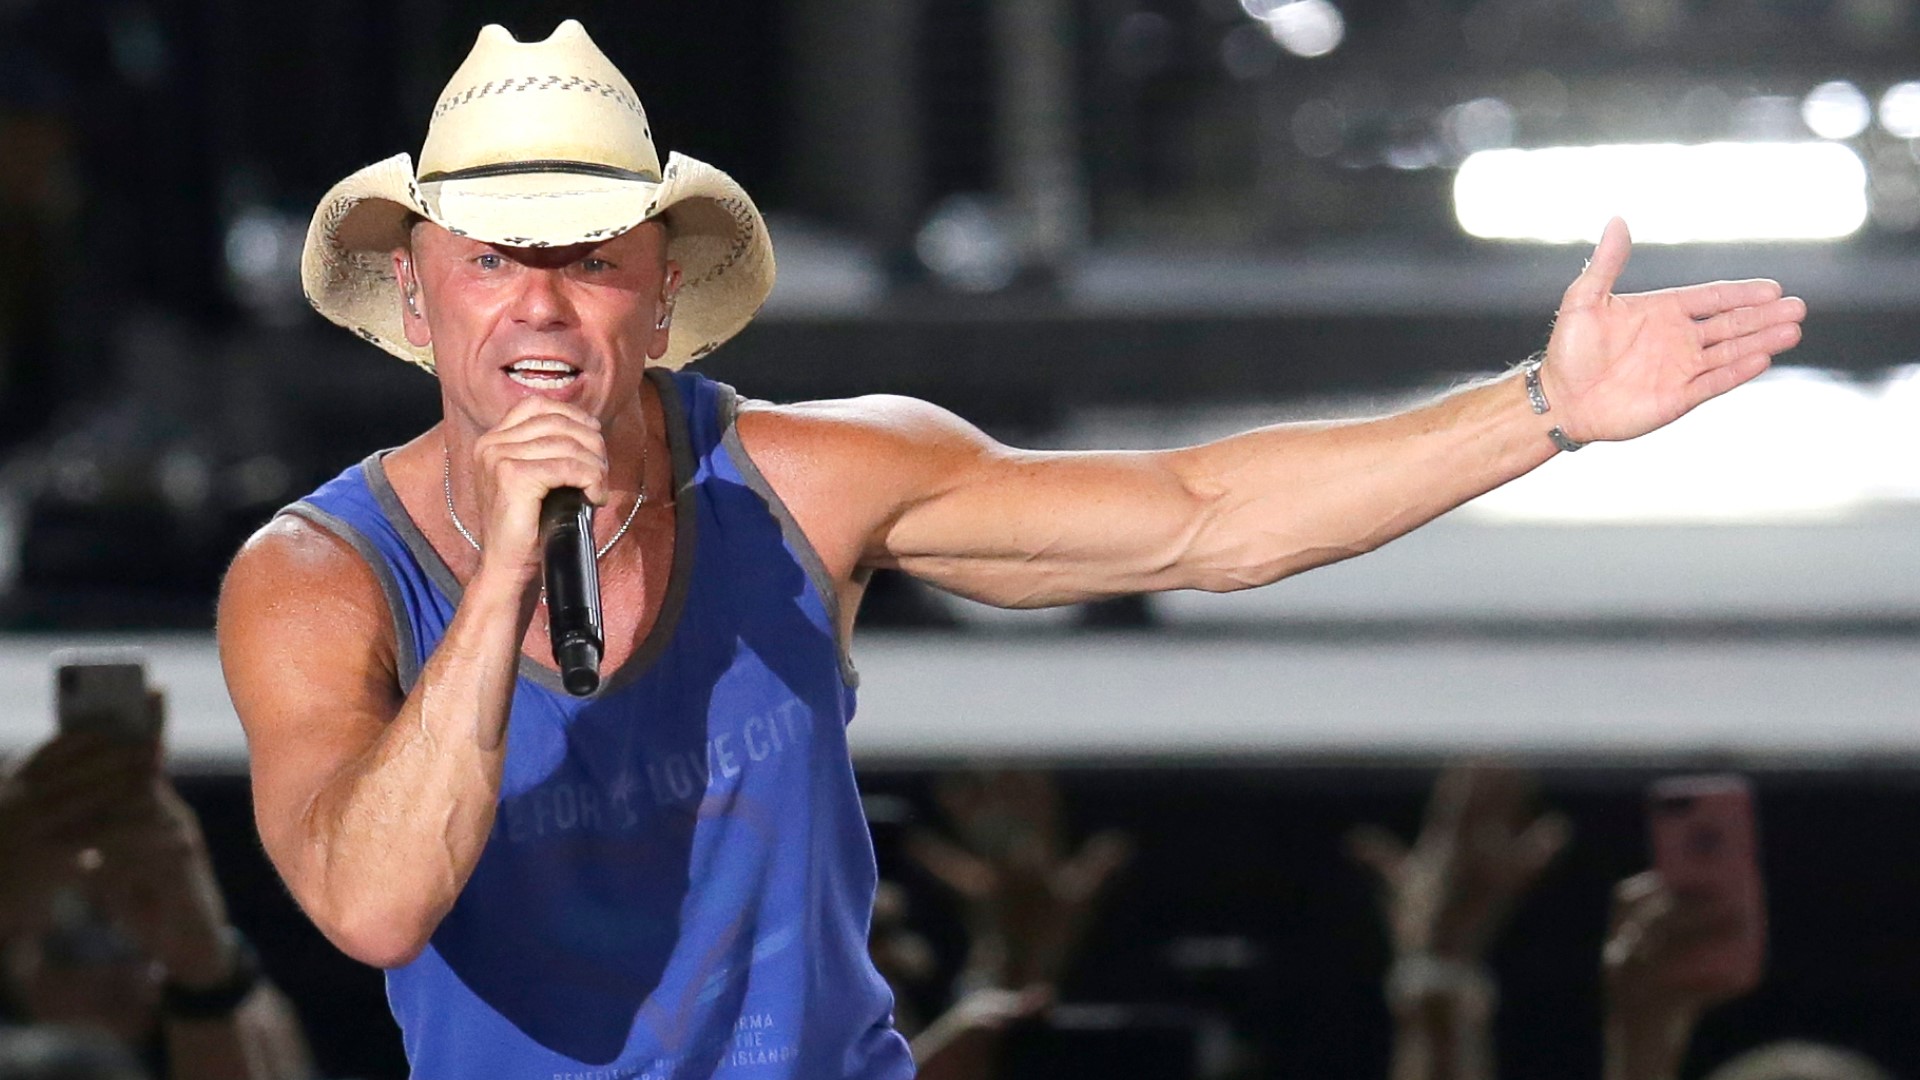 Chesney will perform at Busch Stadium on May 7, 2022, the second stop on his Here And Now 2022 tour.